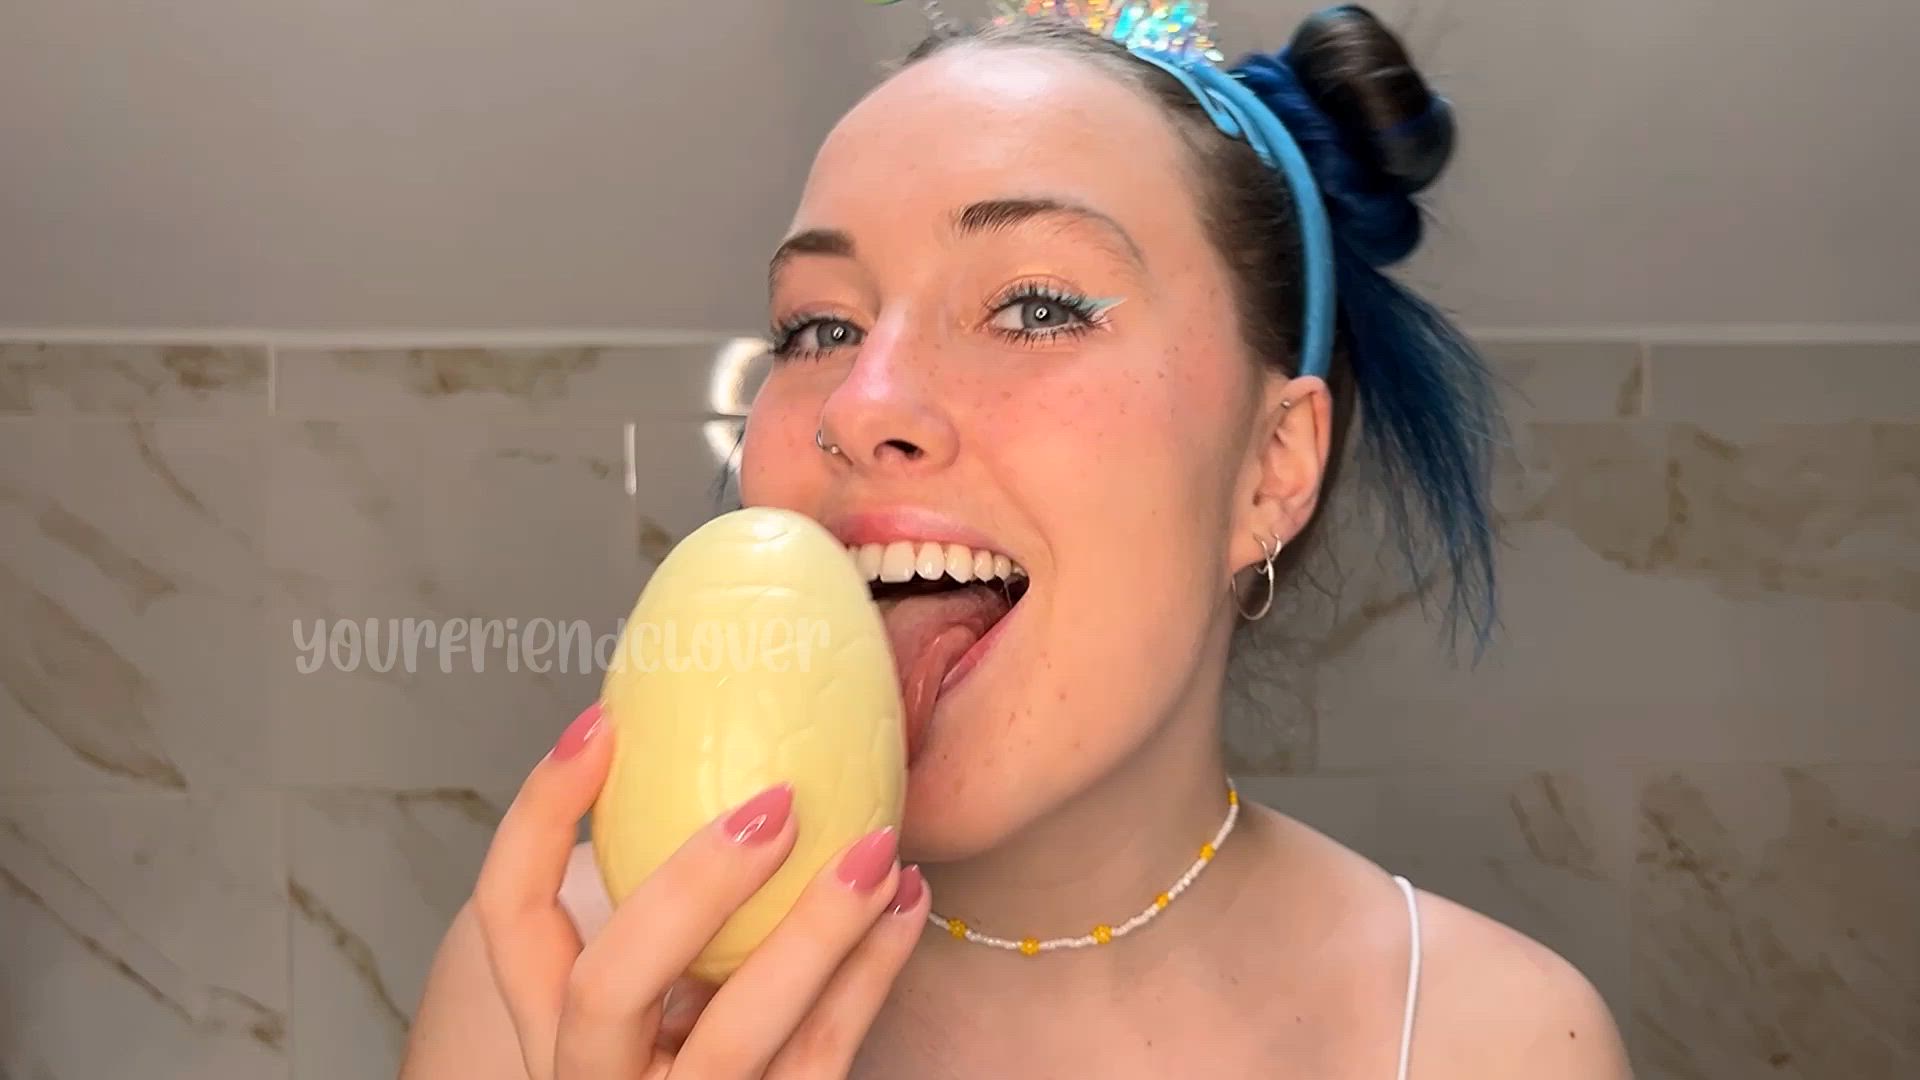 Spit porn video with onlyfans model cloverfae <strong>@cloverfae</strong>